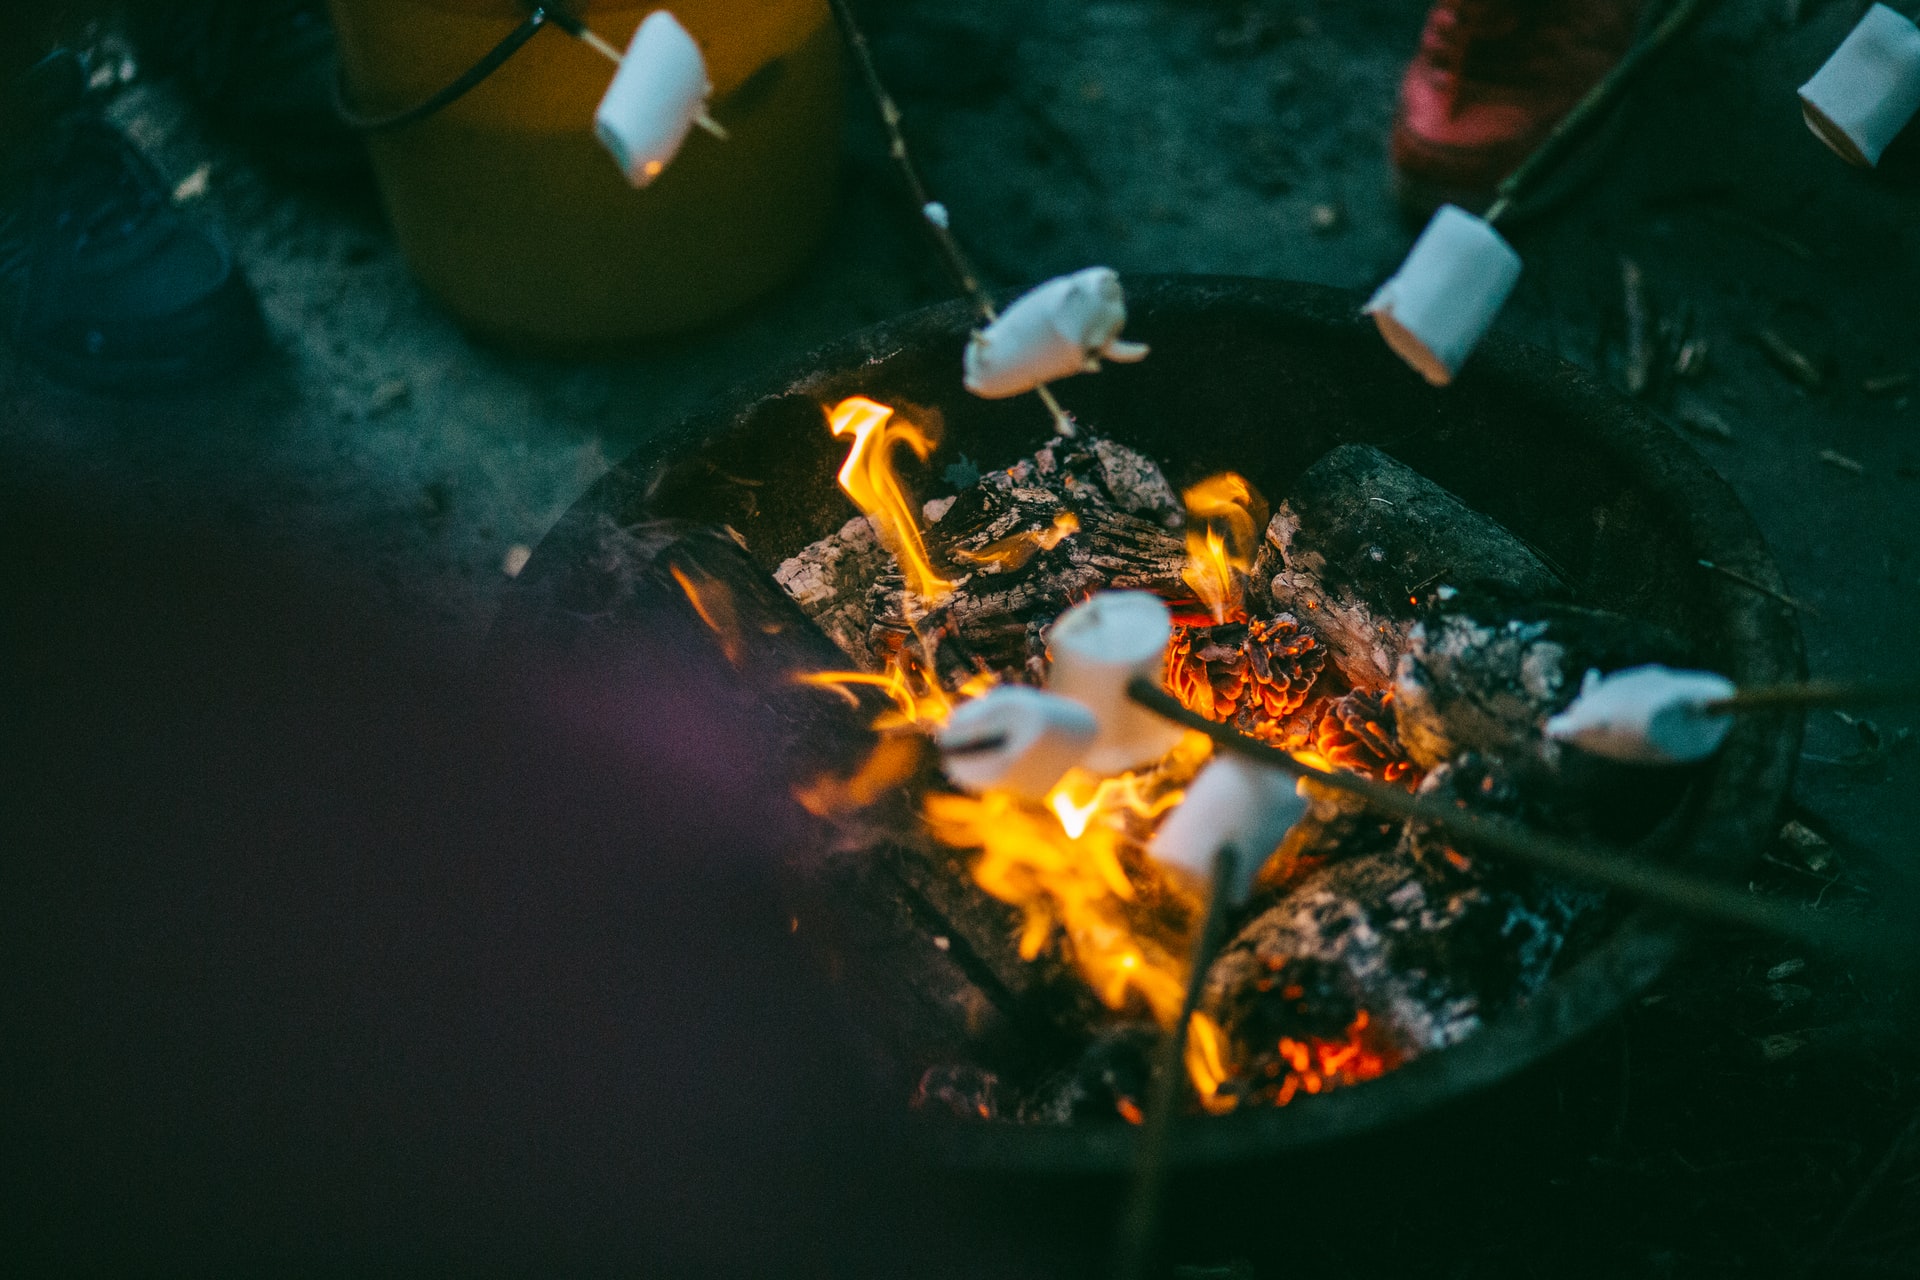 Campfire with roasting marshmallows